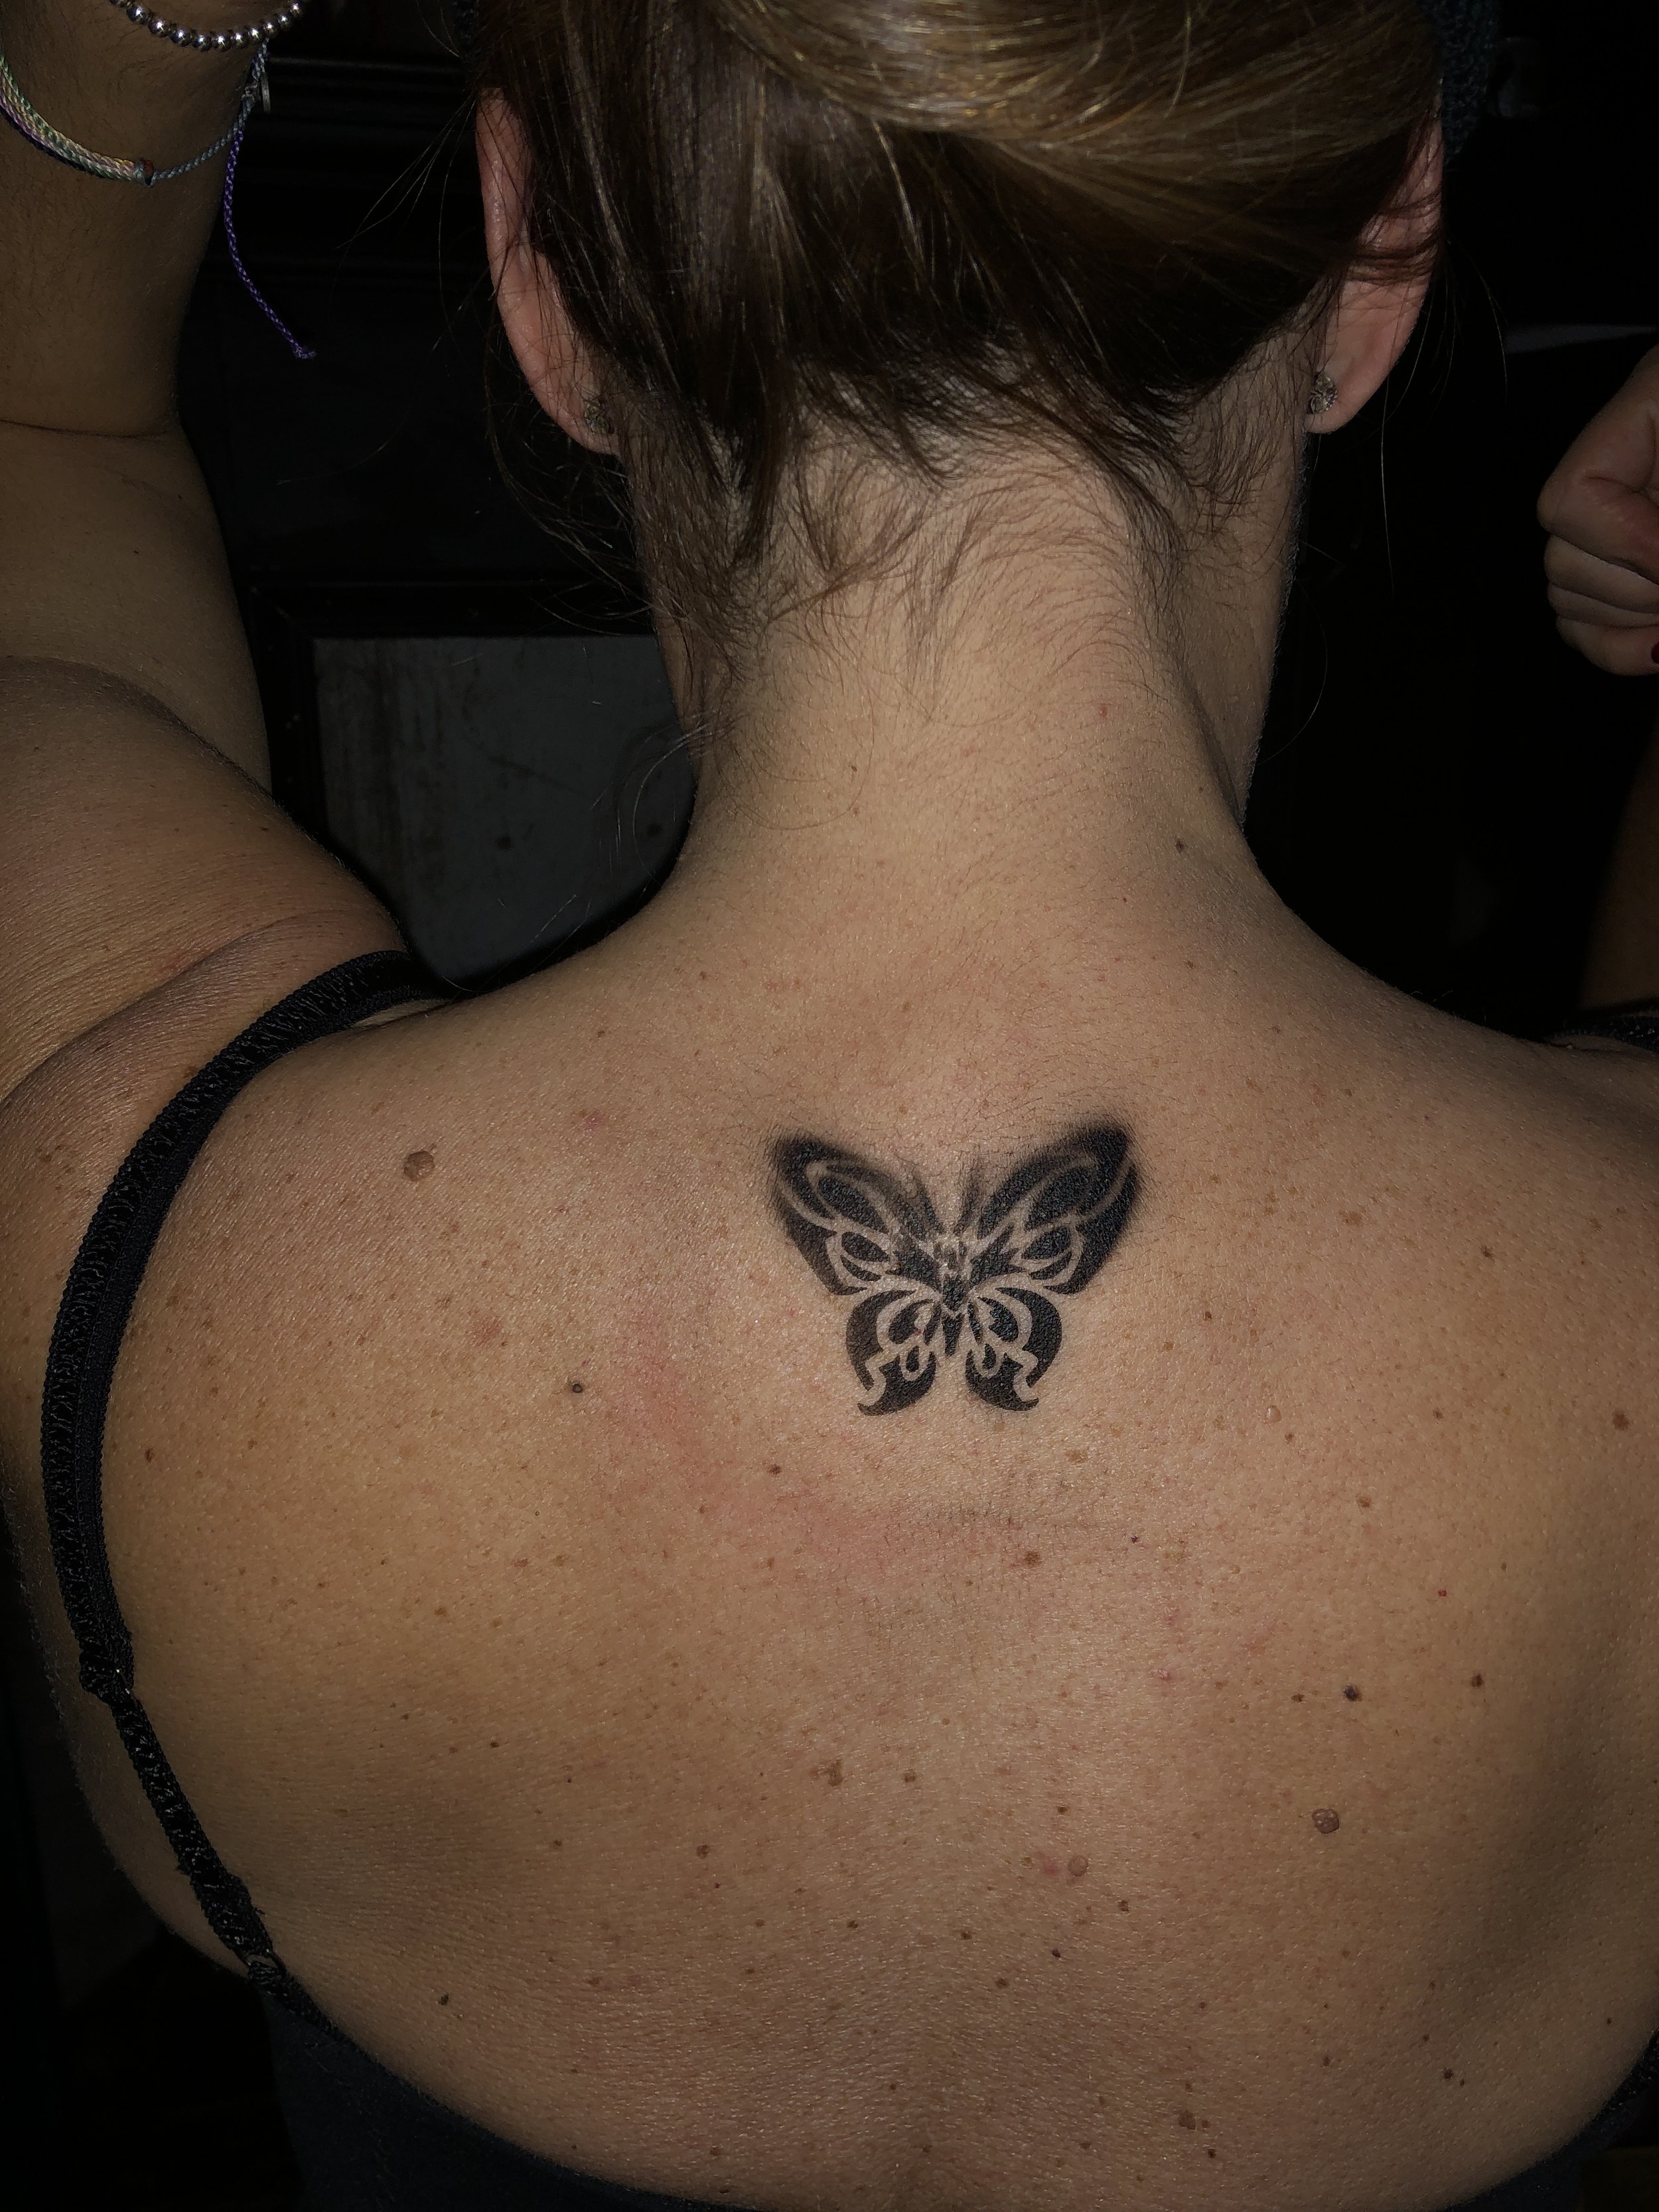 Airbrush Tattoos in New Jersey Wedding After Party.JPG